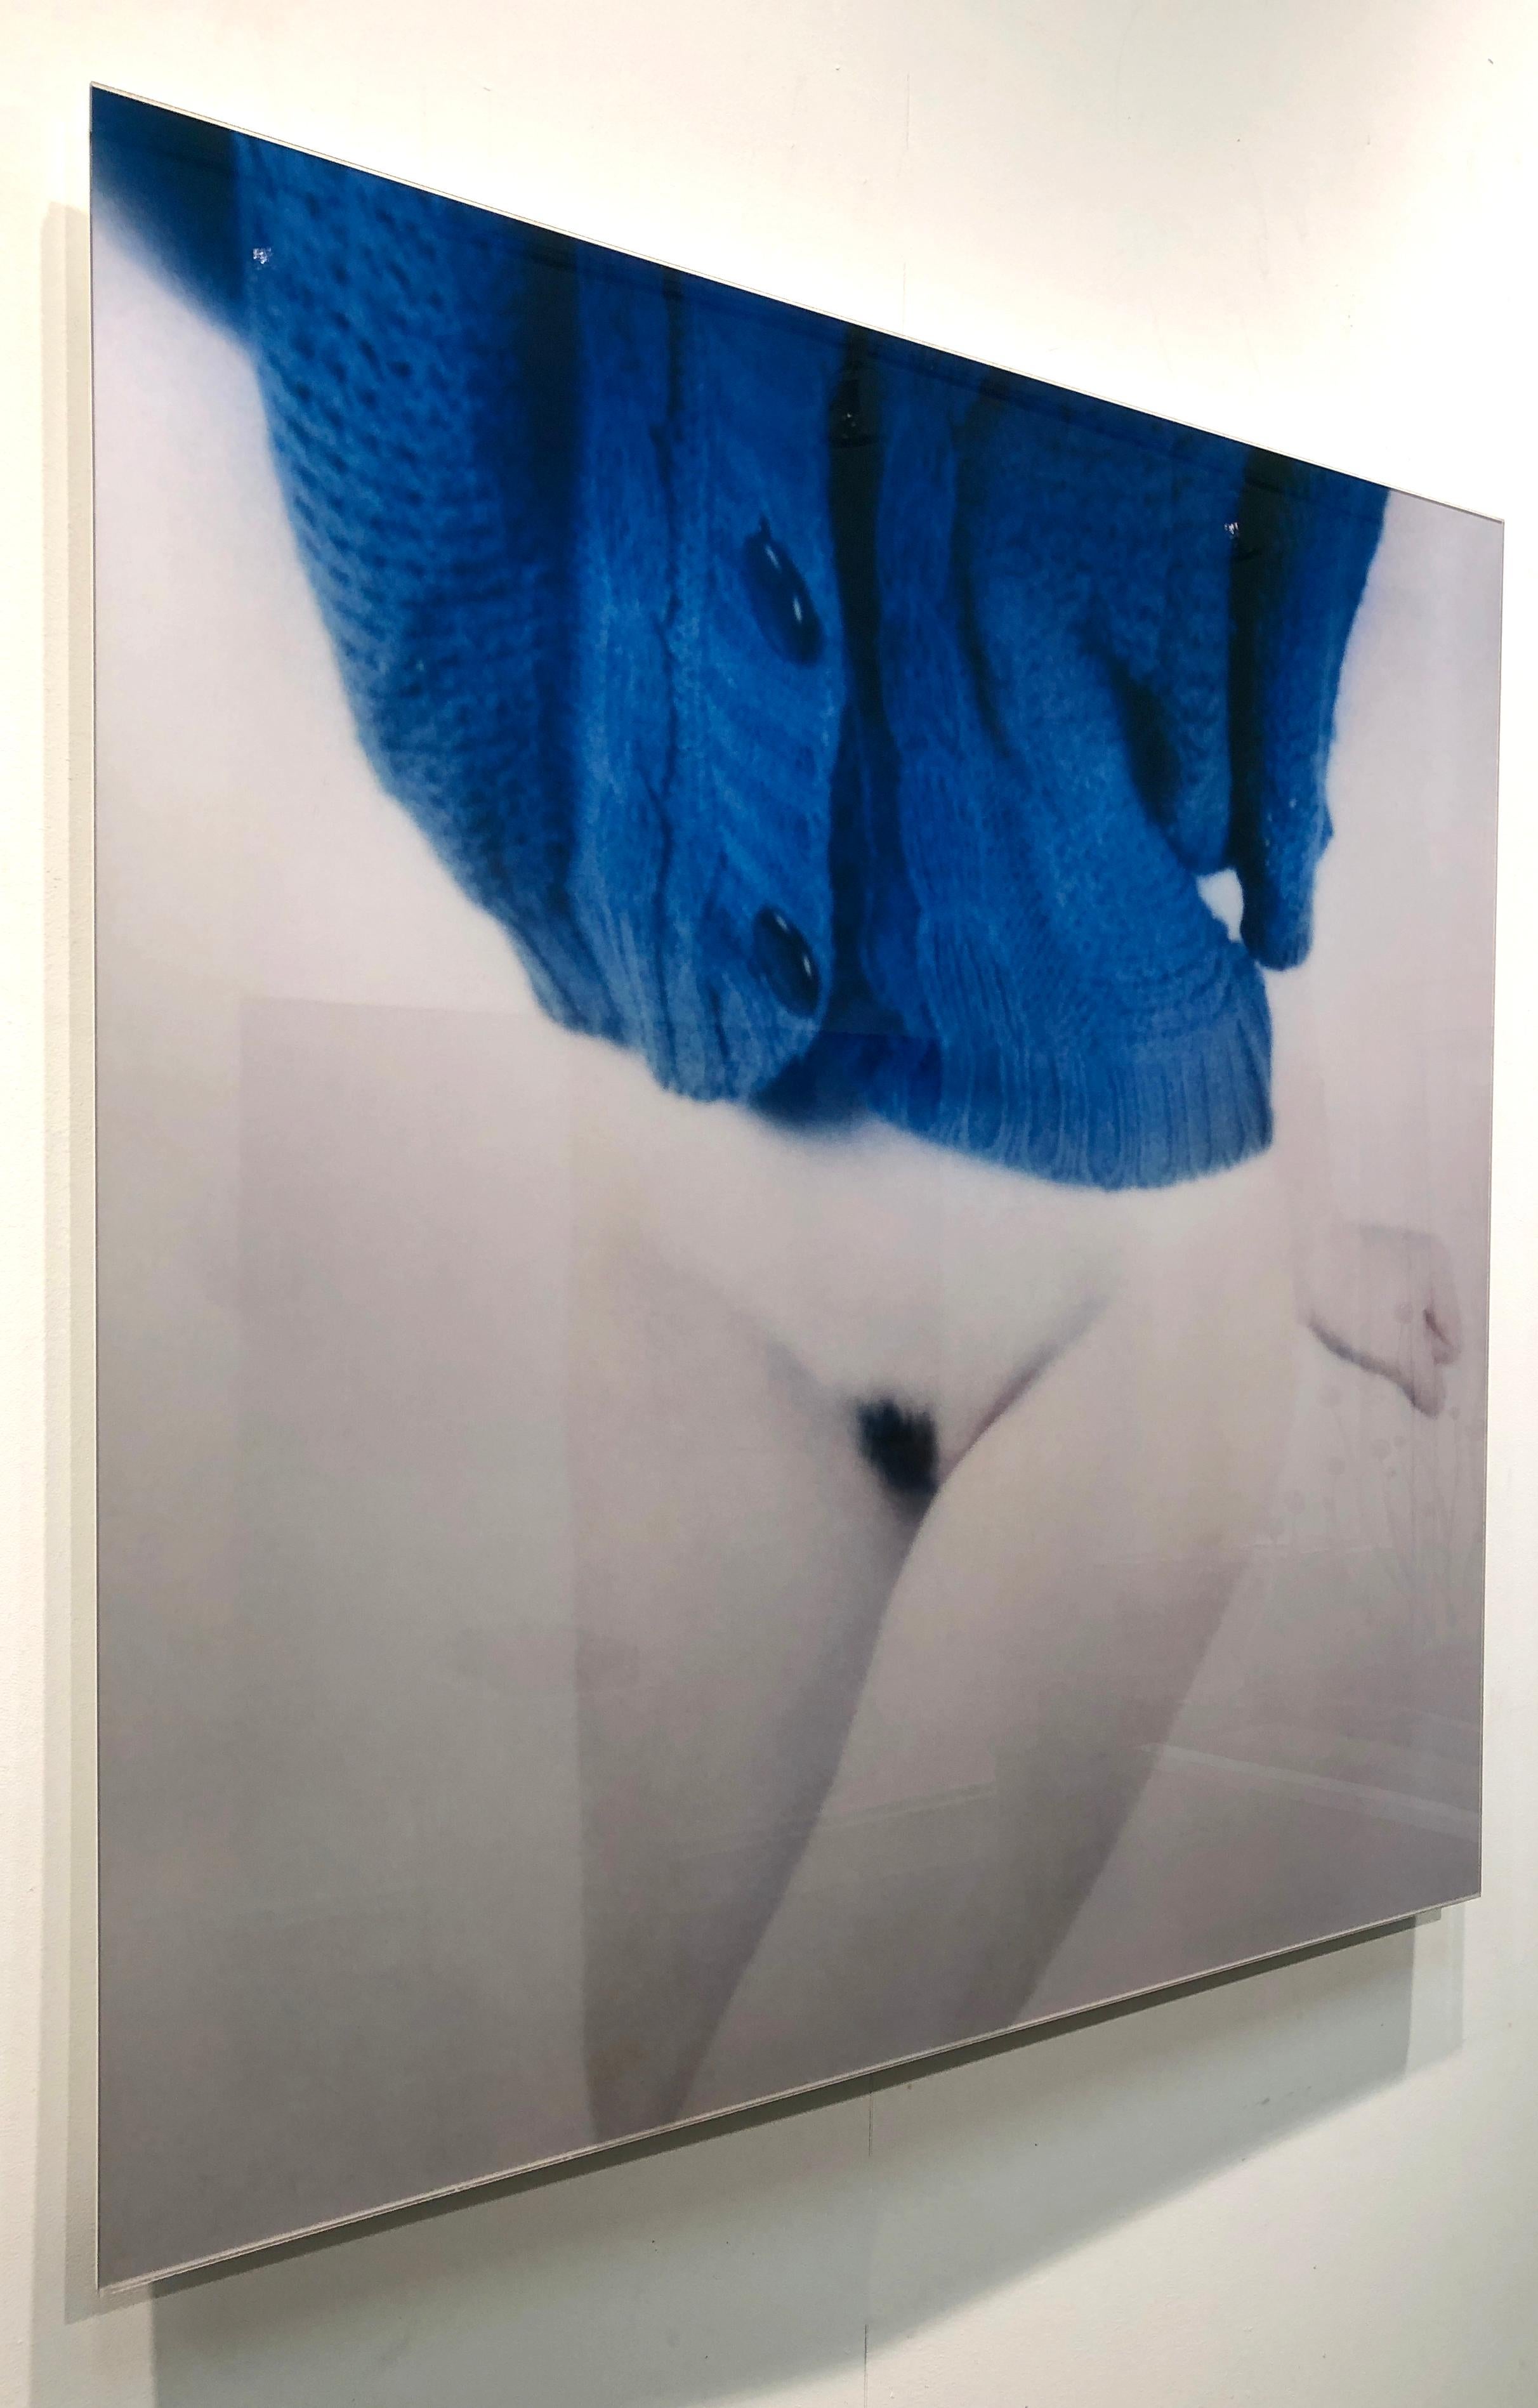 Semi Nude and Blue Knit, from the “Bright Bodies” photography series - Contemporary Photograph by Mira Loew